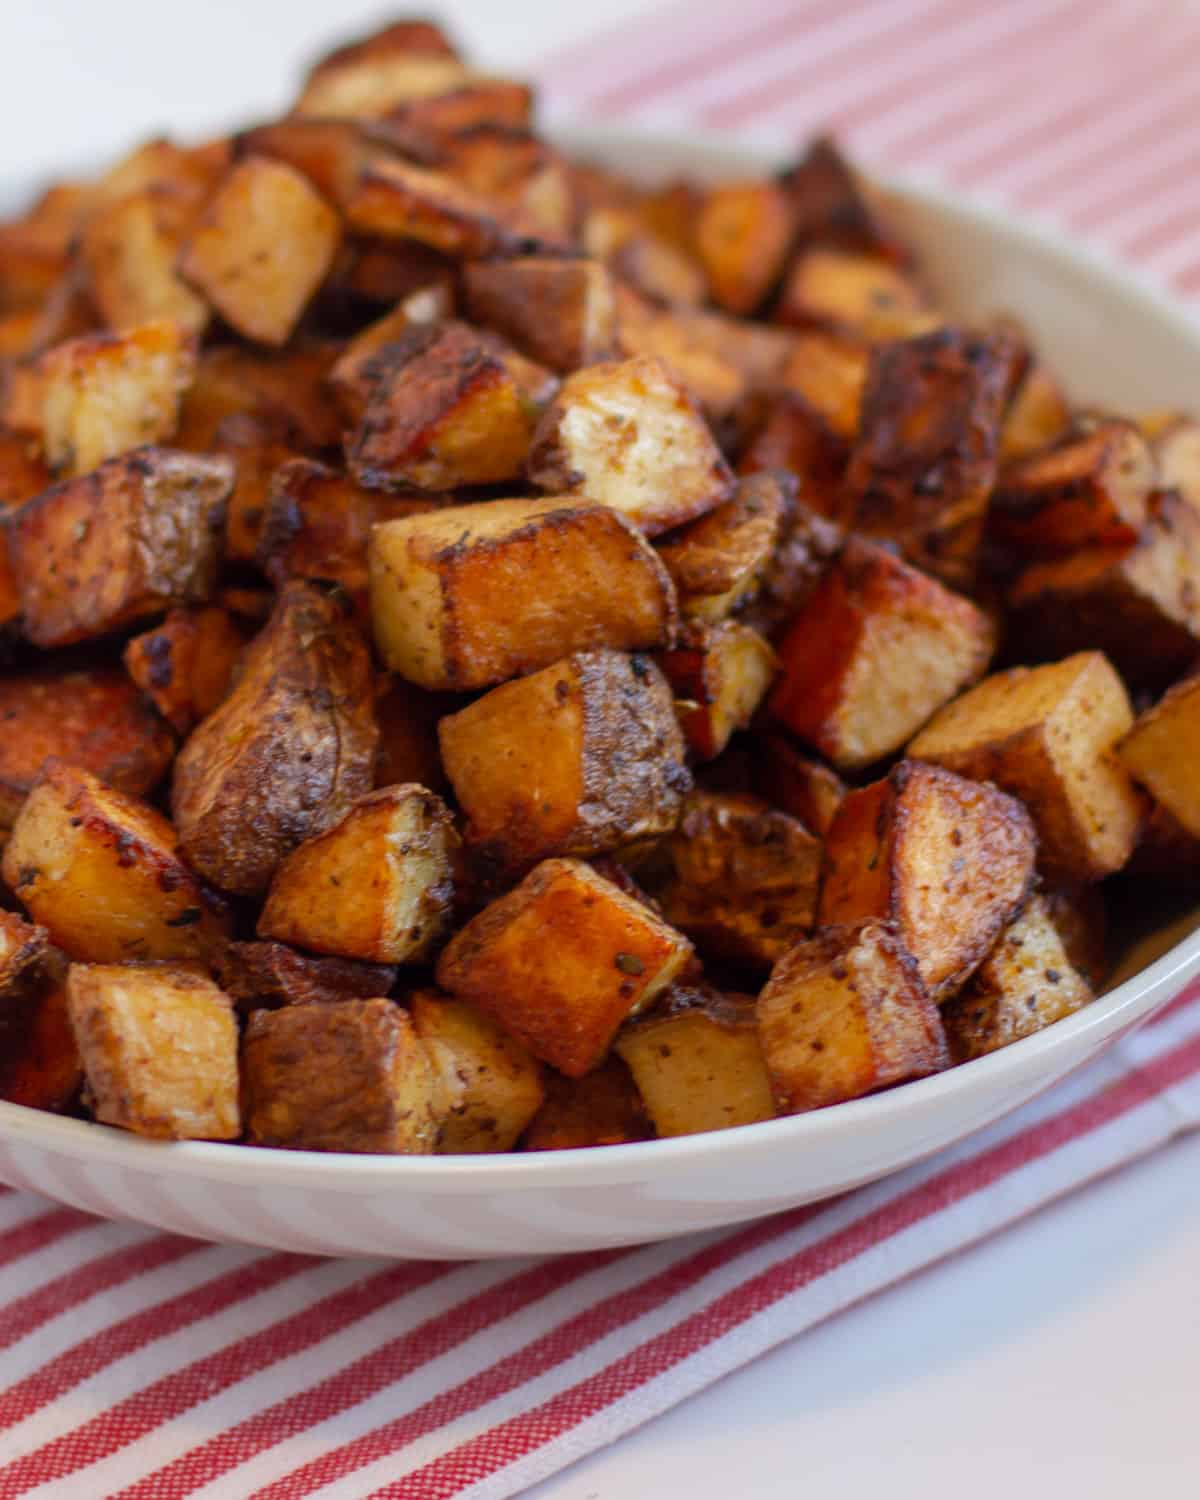 A both filled with spicy hash brown potatoes.